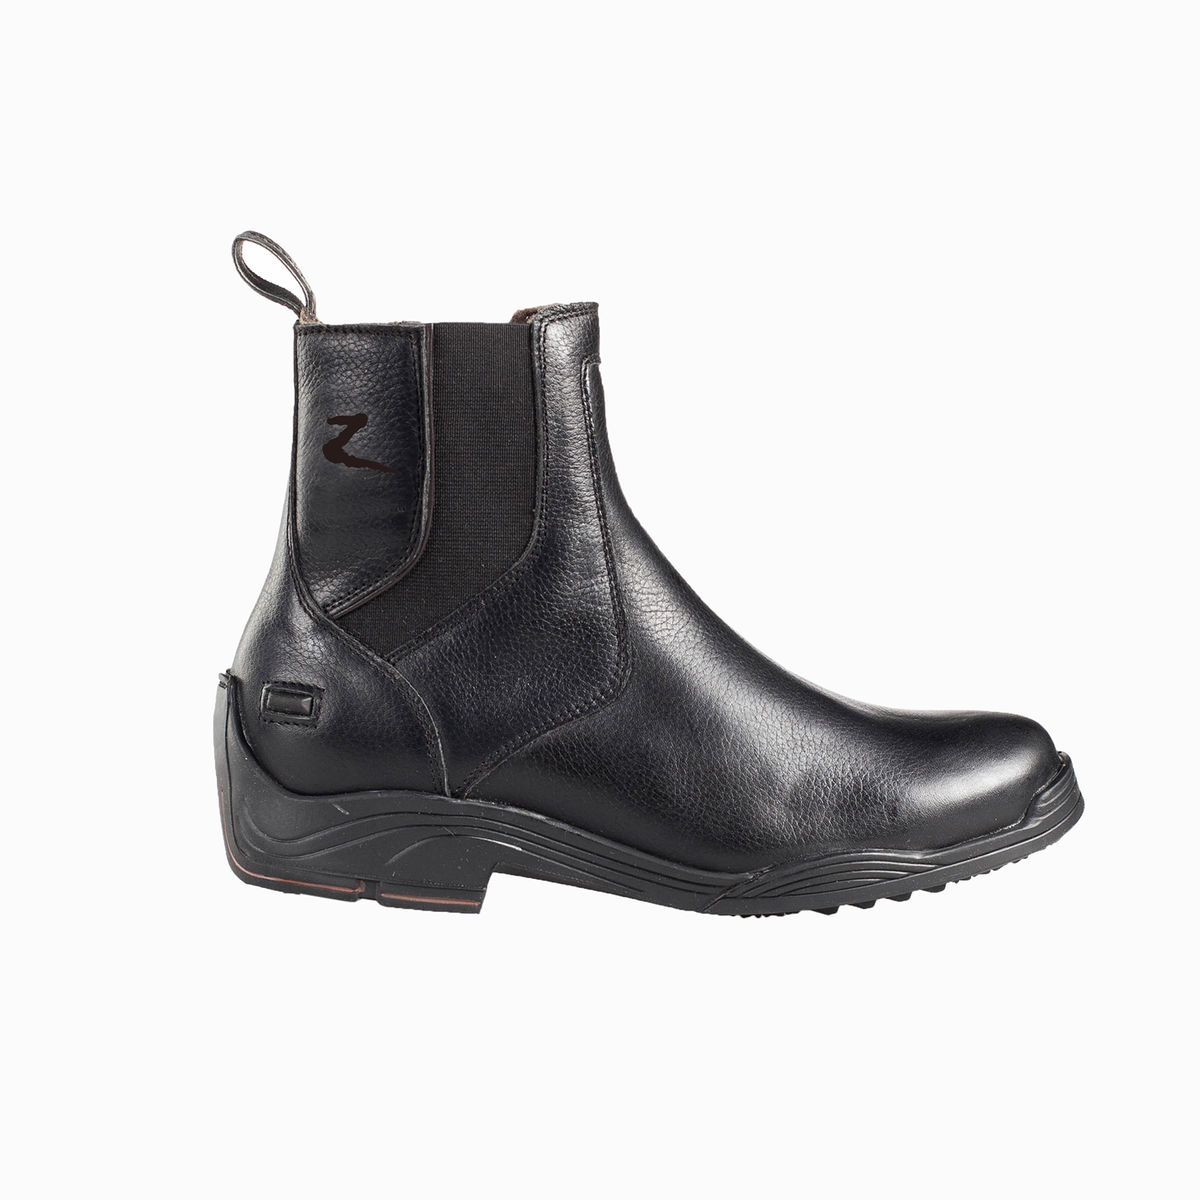 rubber paddock boots